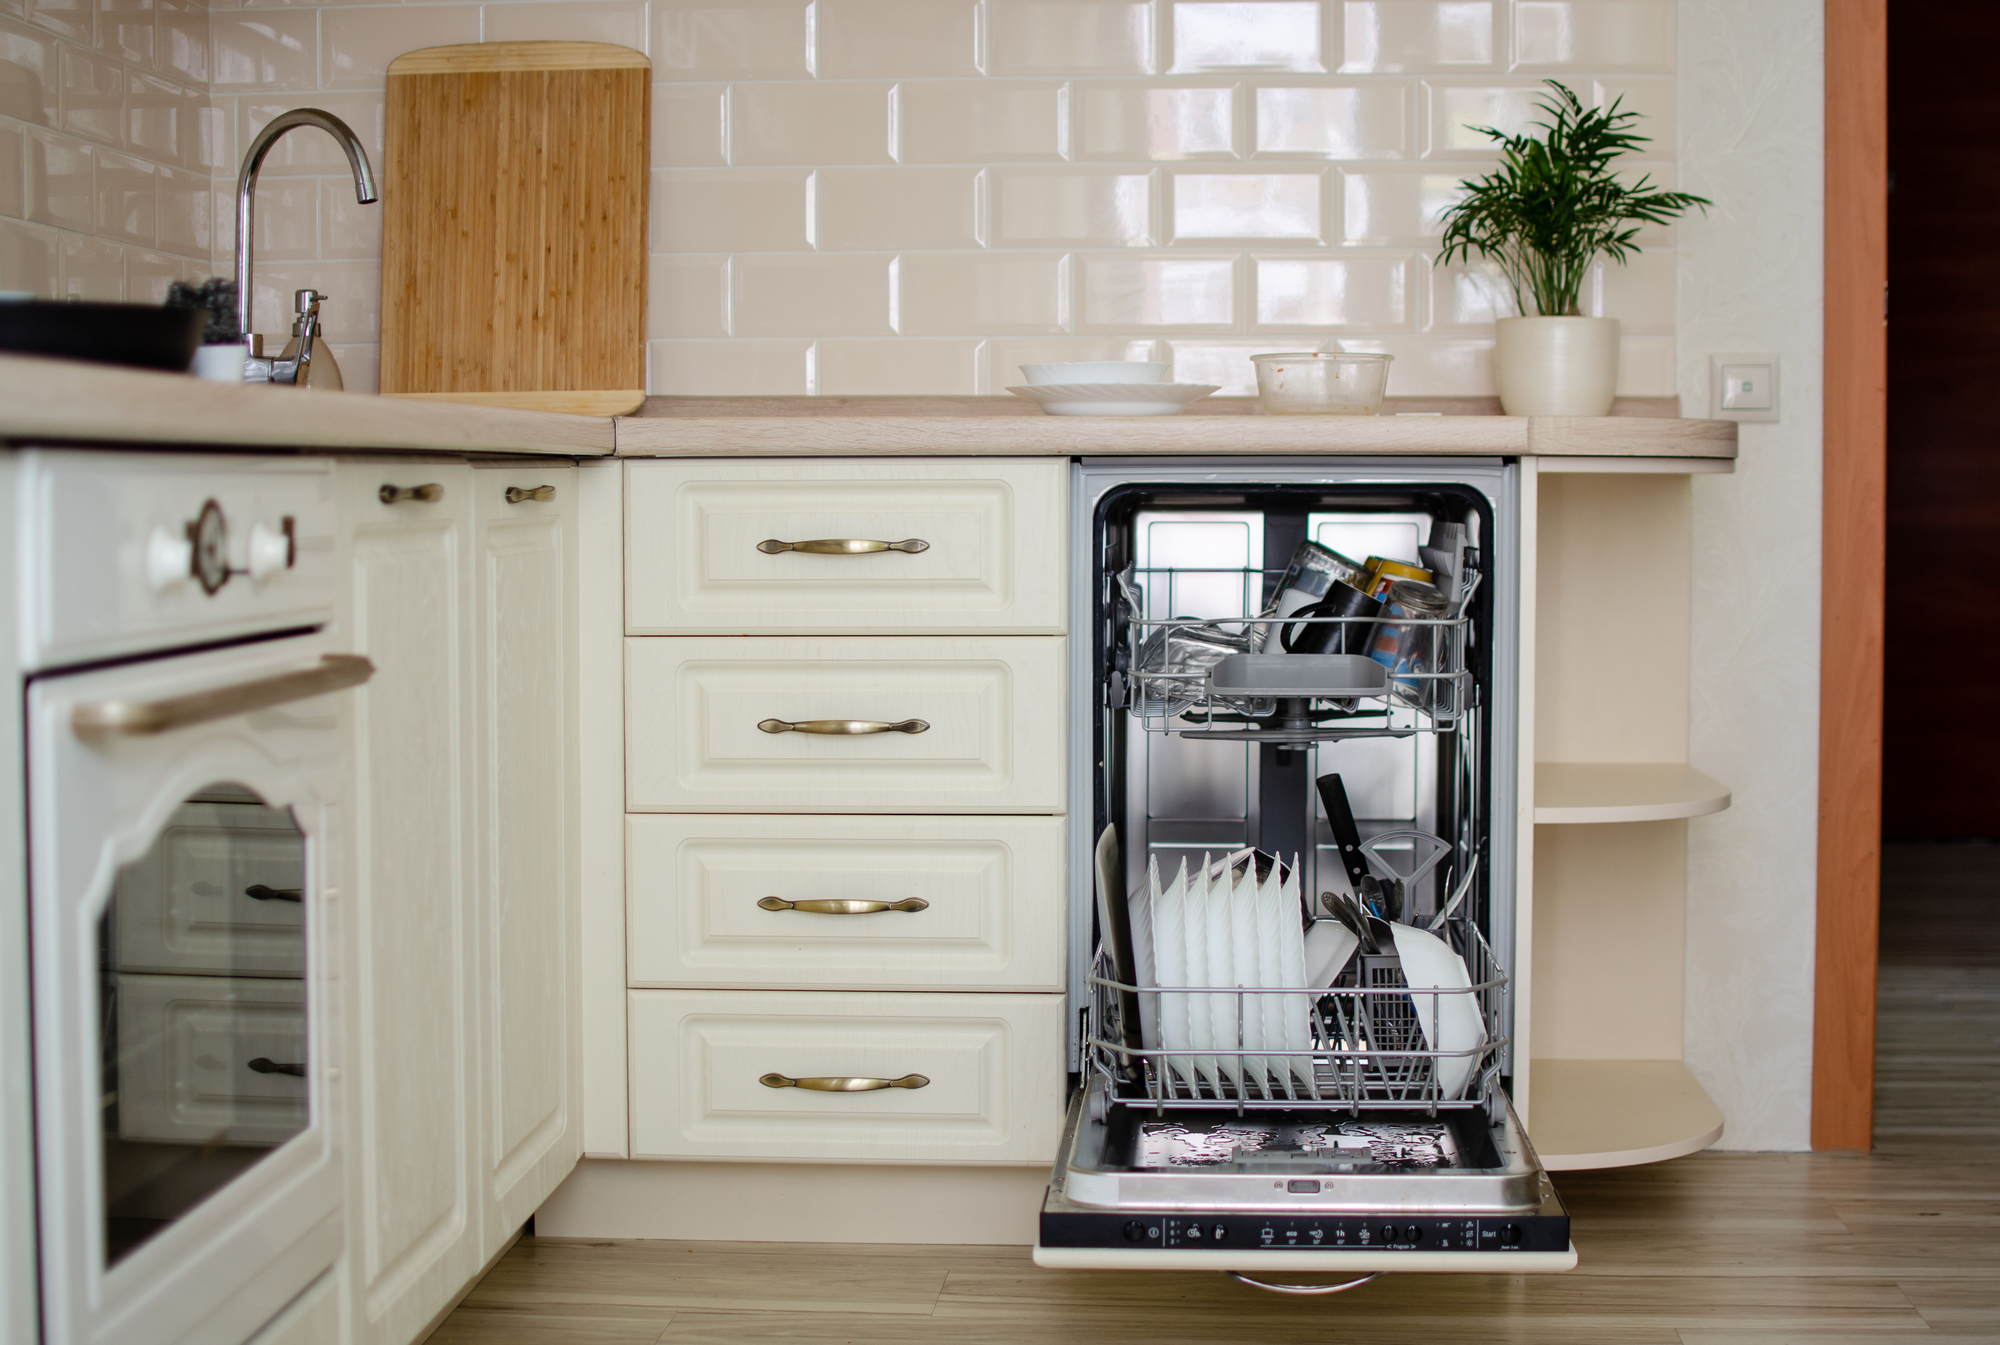 How To Clean A Dishwasher And Its Filter Quickly So Your Dishes Sparkle